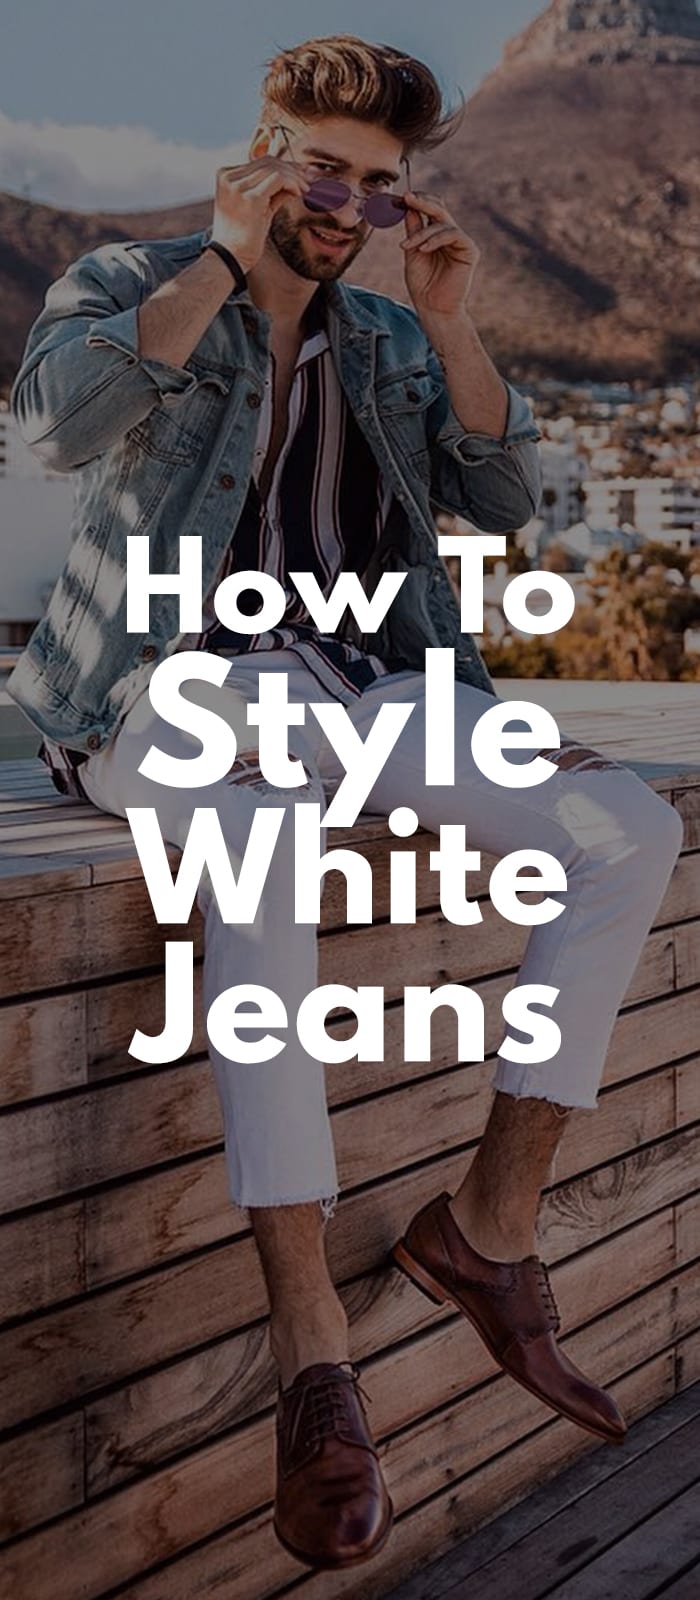 How To Style White Jeans.